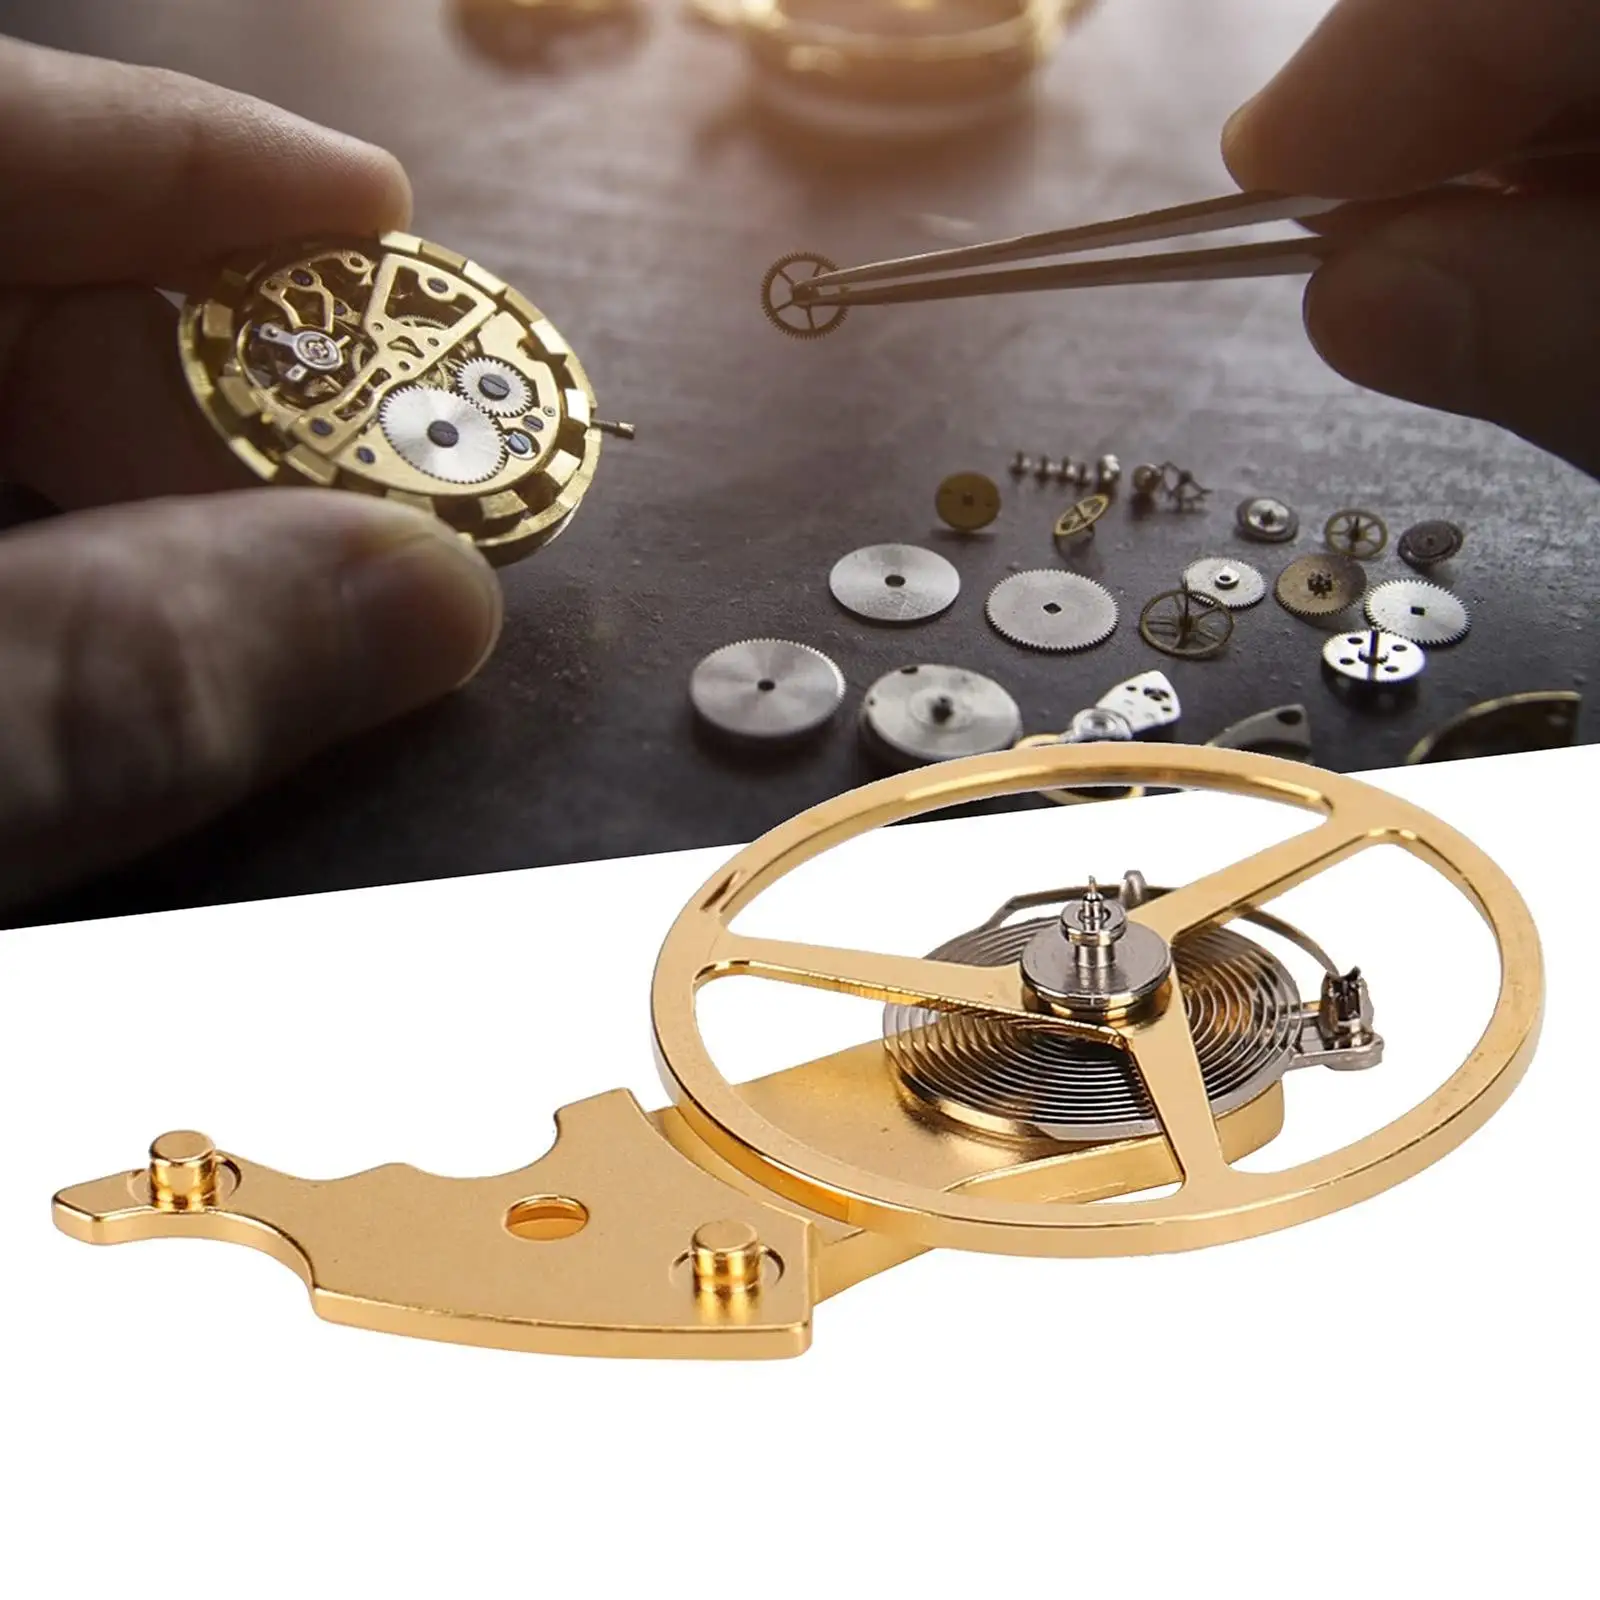 Durable Watch Balance Wheel Repair Tool Watch Movements Accessories, with Splint Set for Replacement Watch Repairer Watchmakers